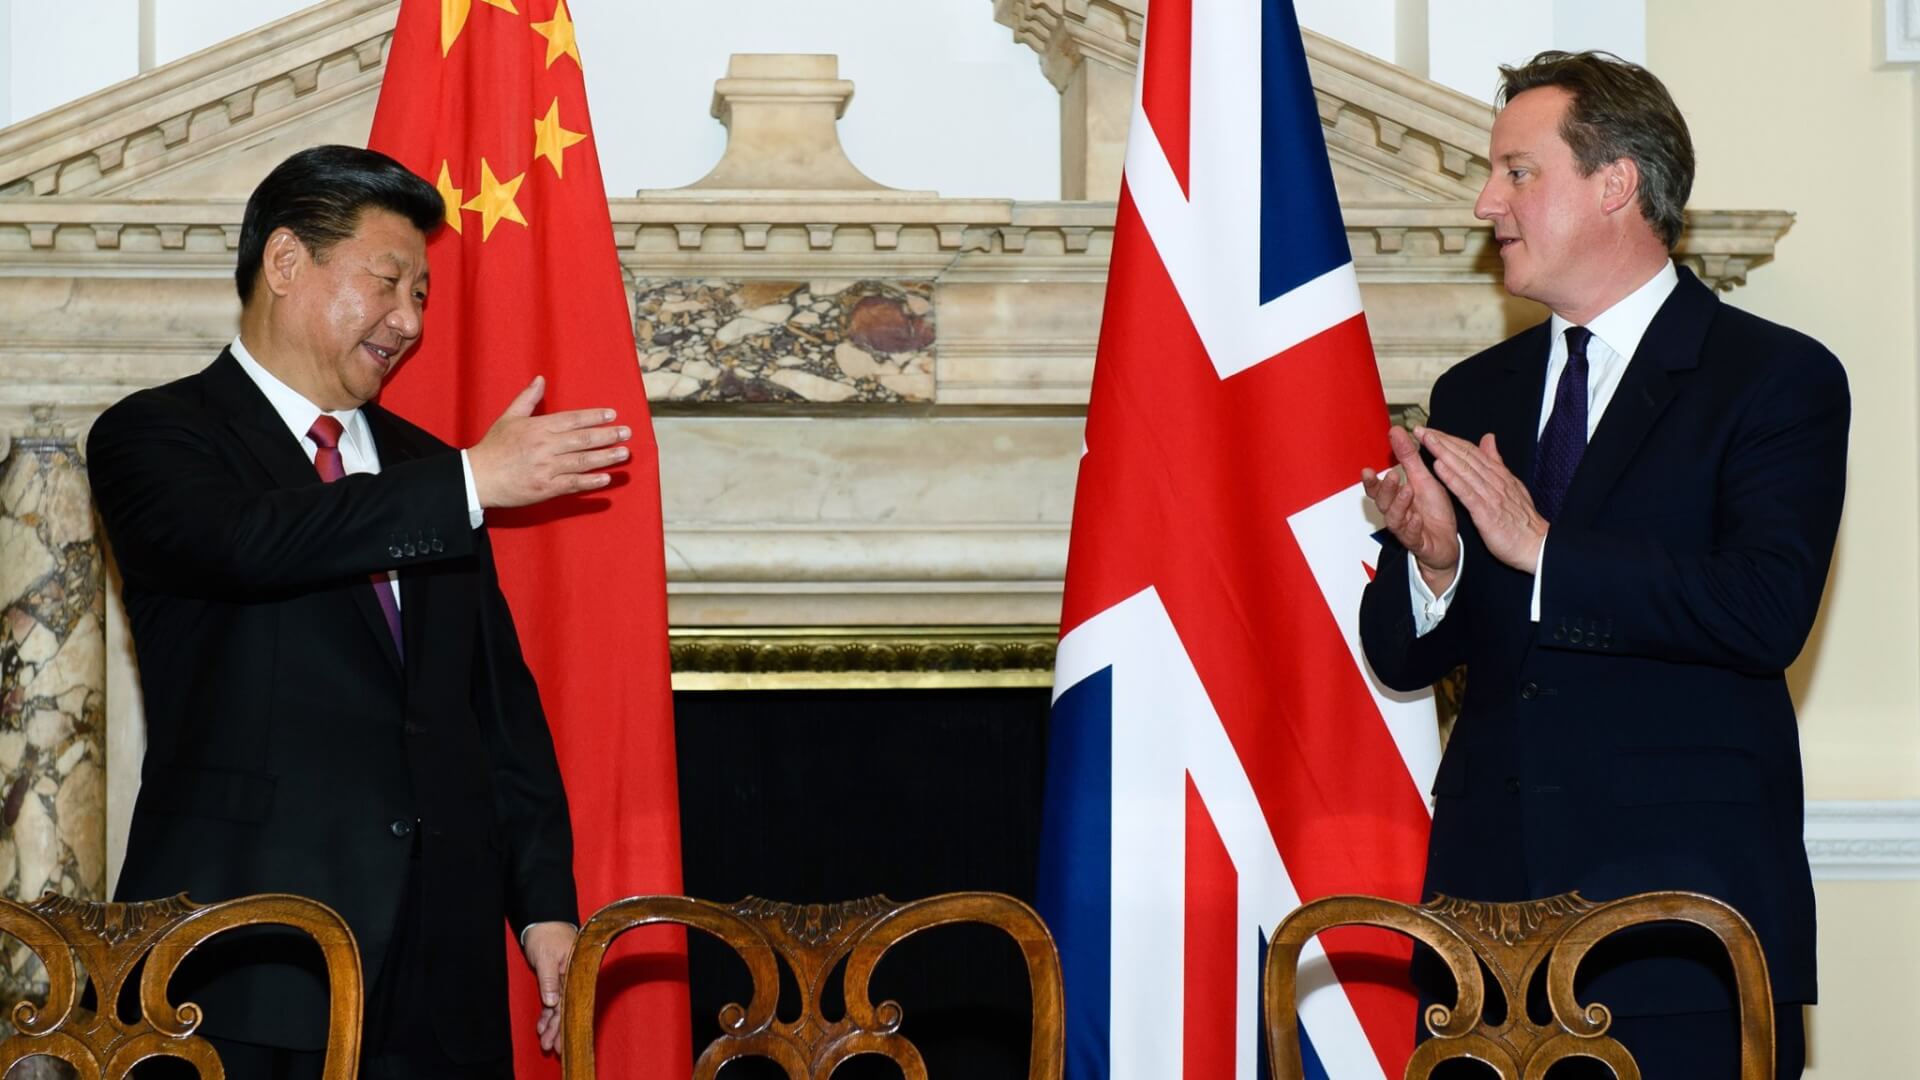 UK Foreign Affairs Committee Accuses China of “Bullying